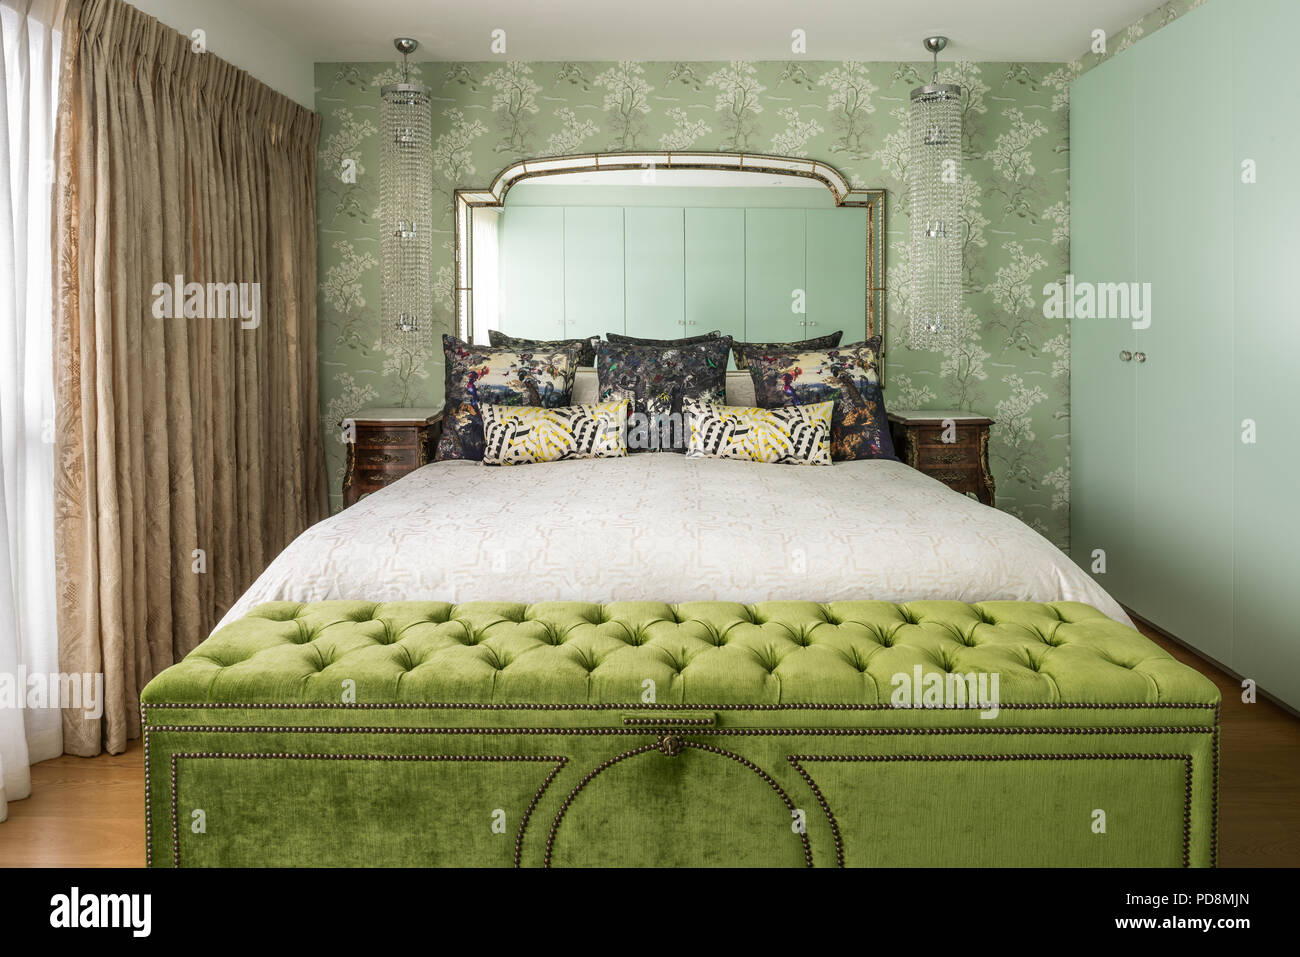 Lime green blanket box at foot of double bed Stock Photo